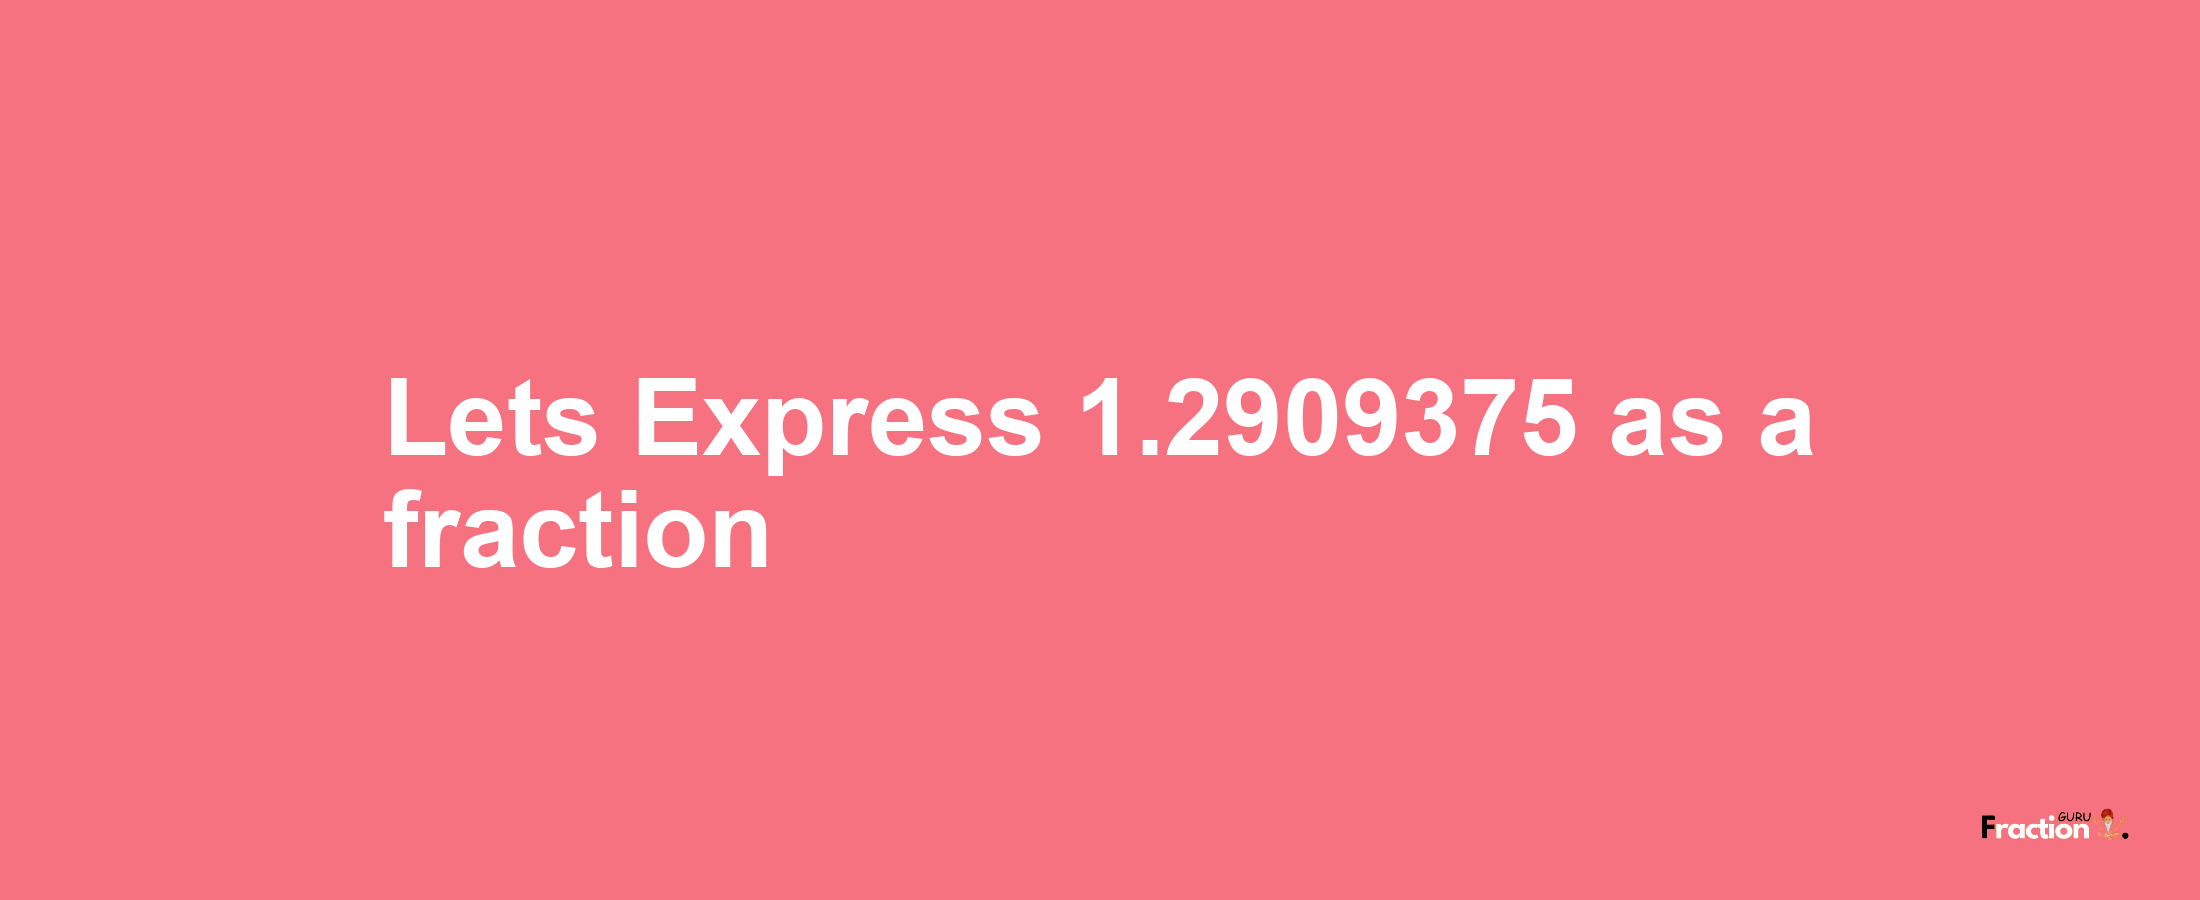 Lets Express 1.2909375 as afraction